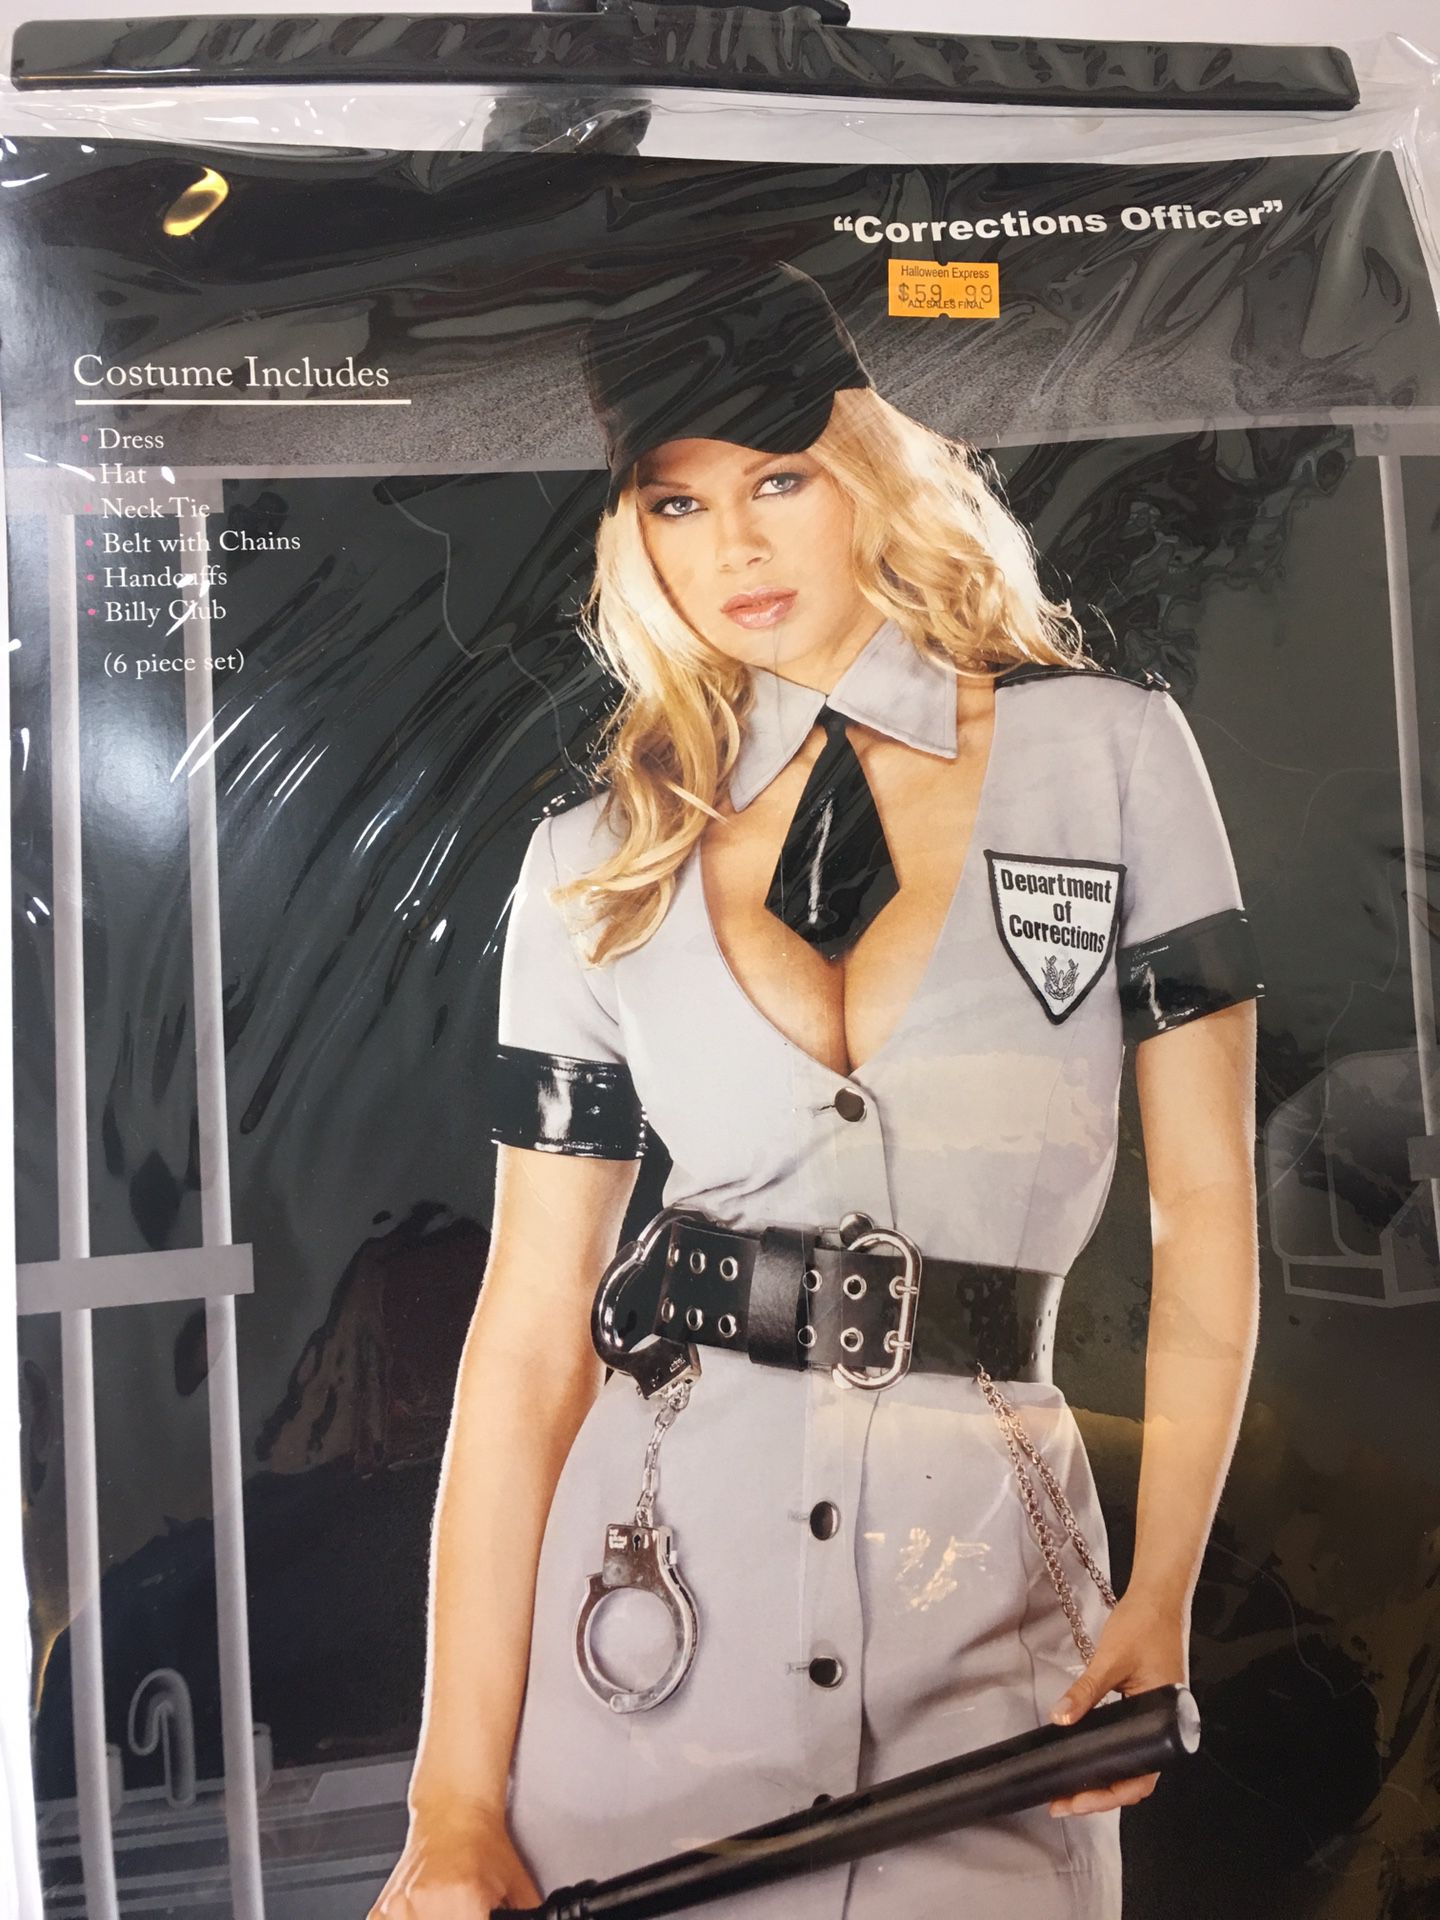 Halloween Costume Women Sexy Corrections Police Officer Dreamgirl Small